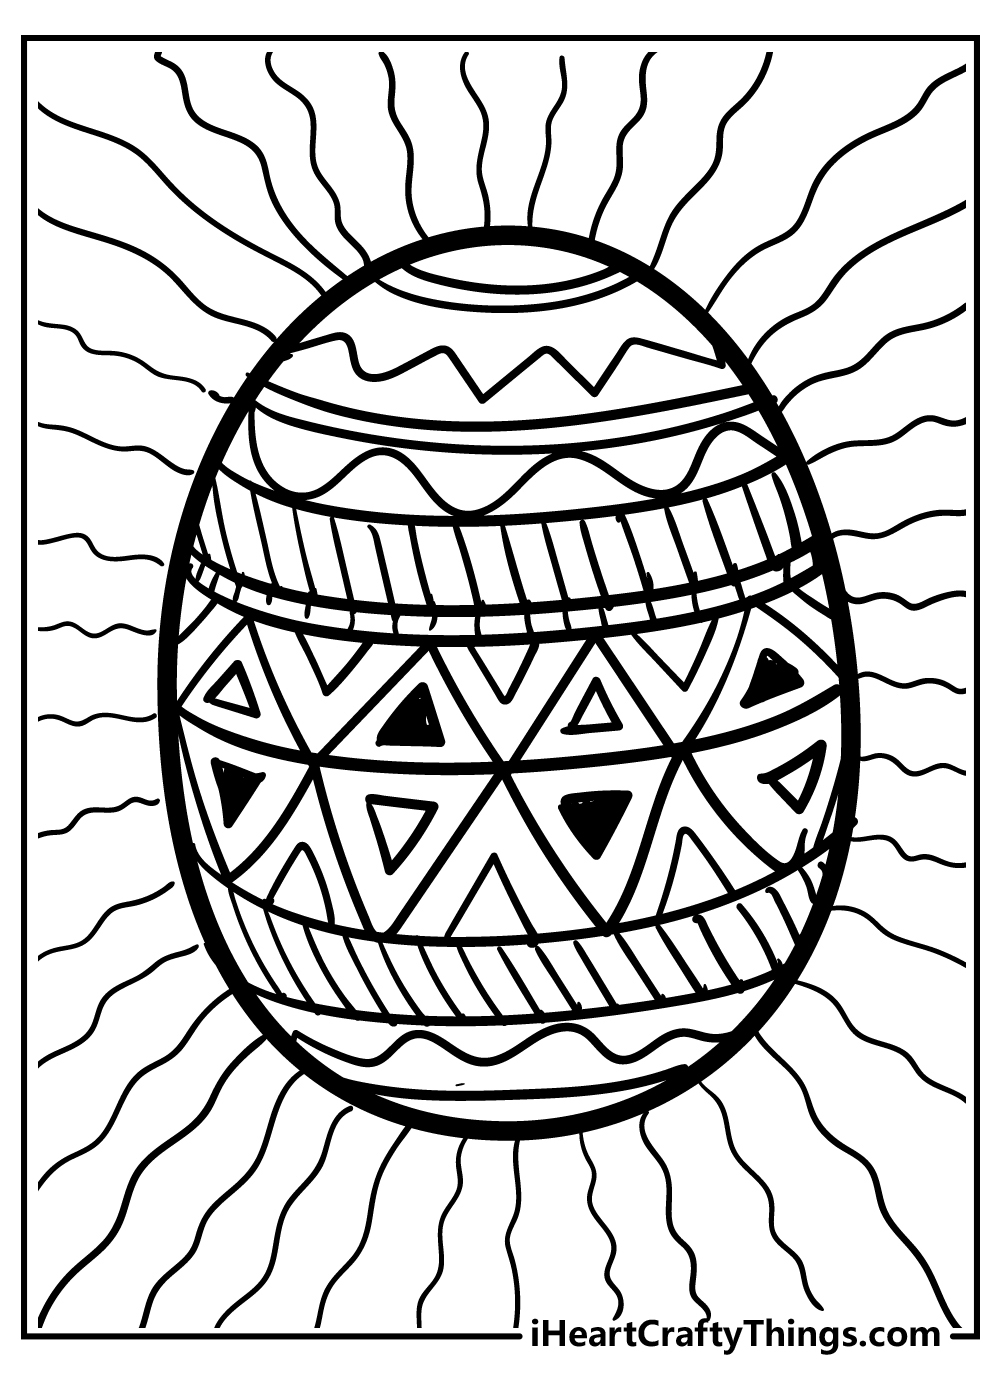 Easter egg coloring pages free printables